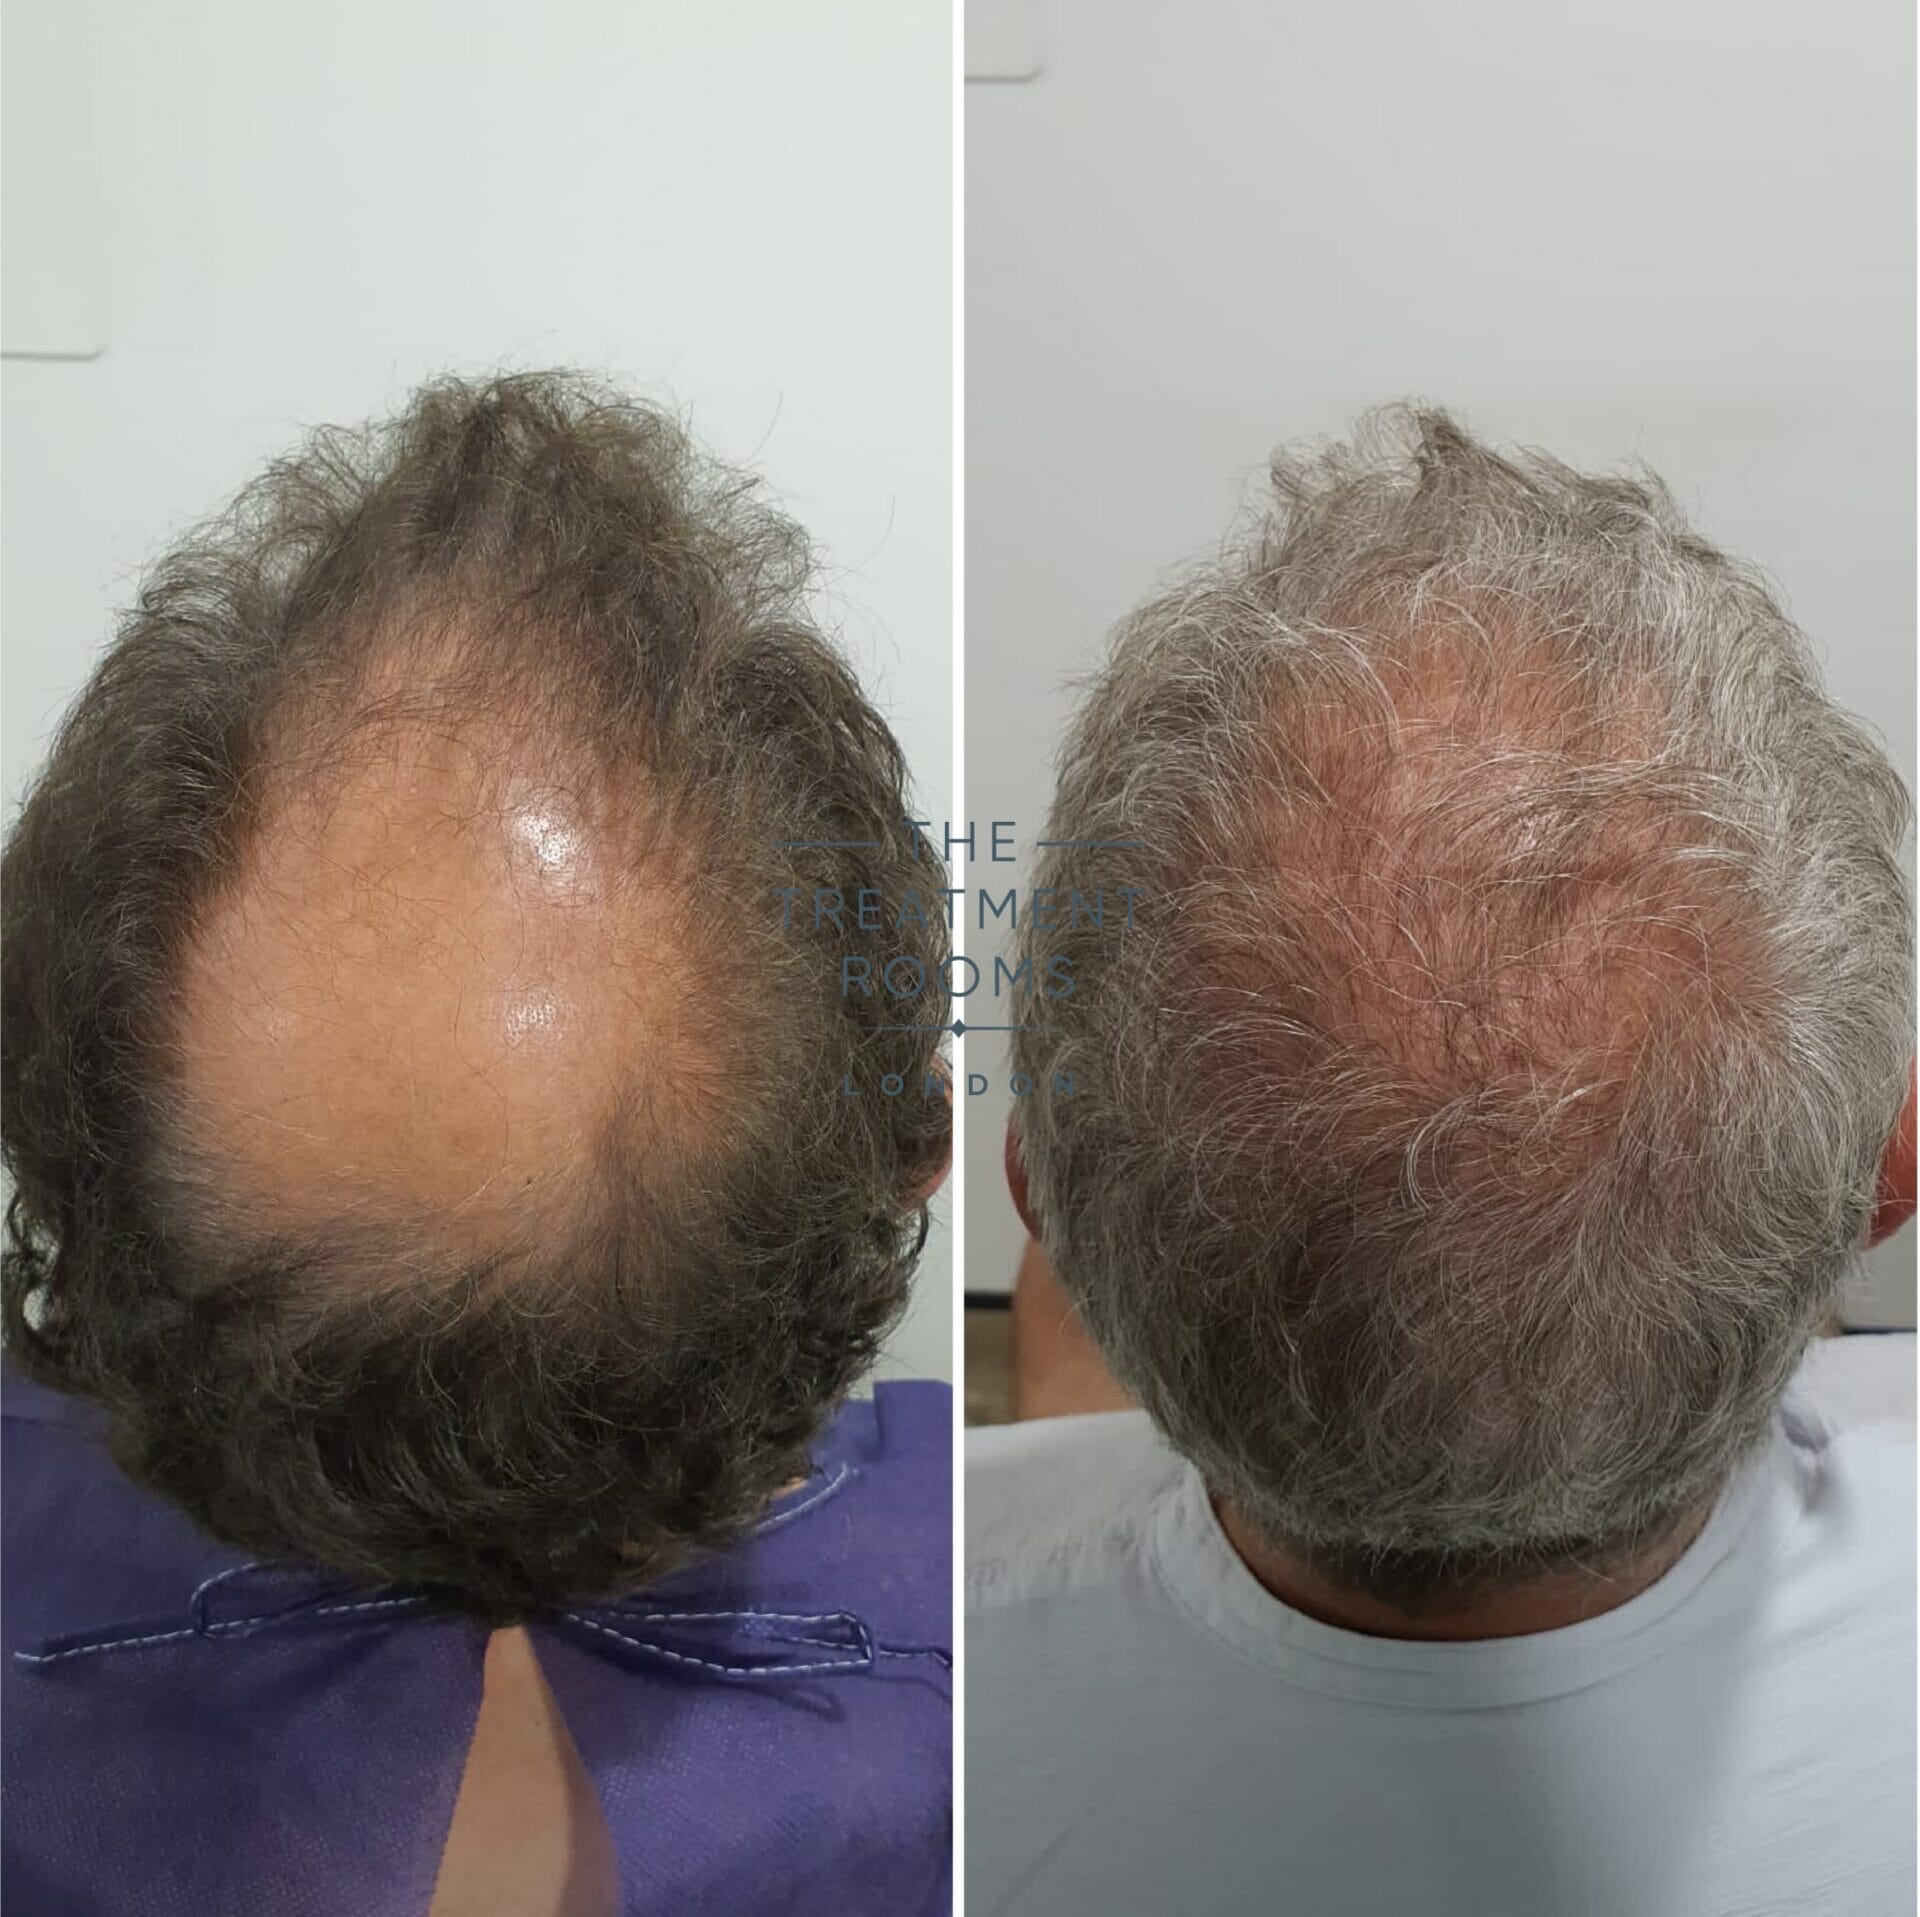 large crown hair transplant cost